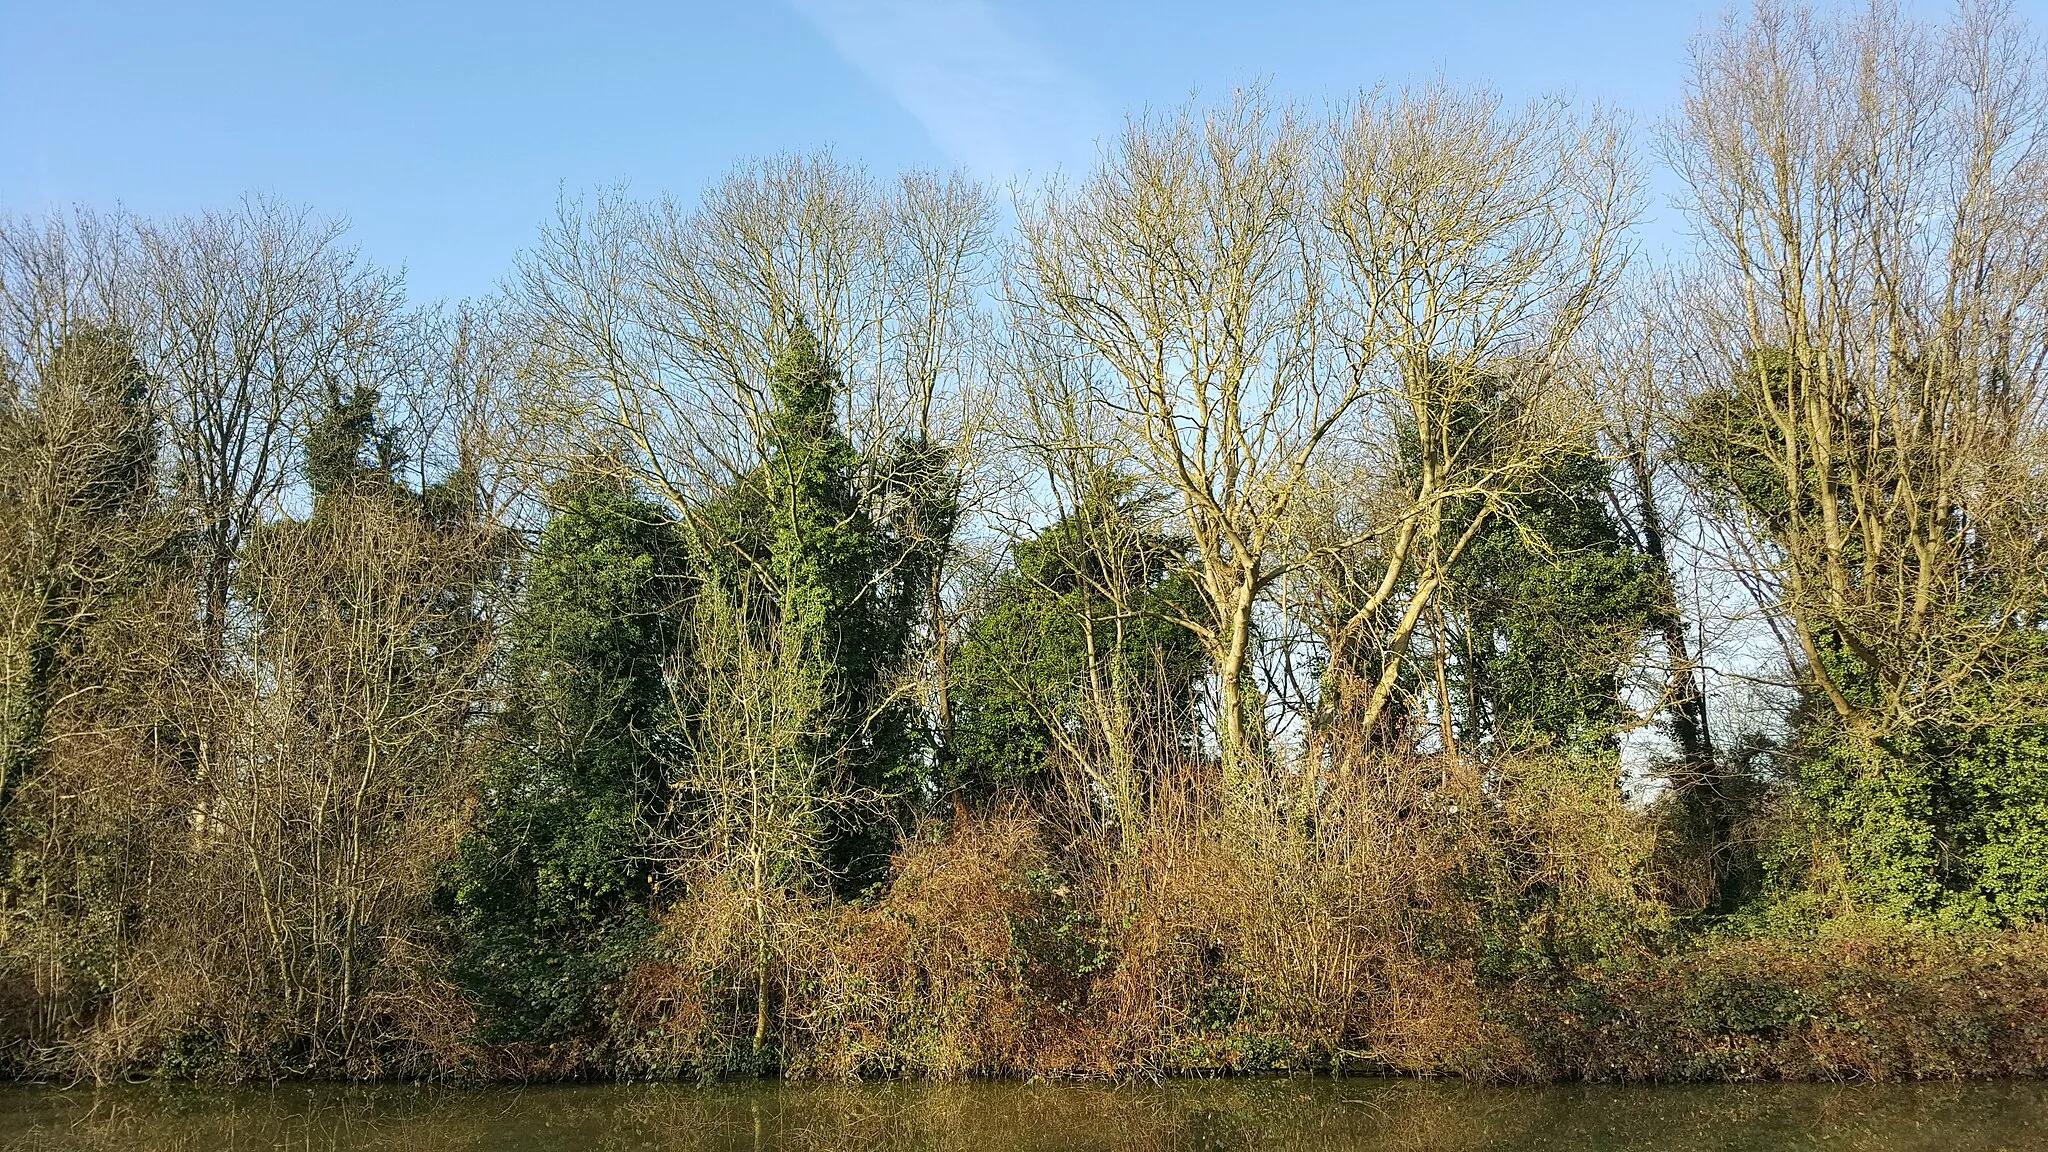 Photo showing: , an island in the River Thames off the shore of Sunbury, Surrey. Despite the name it is not accessible directly from Sunbury, other than by a footbridge to Wheatley's Aitwhich is closed to the public. A public footbridge connects the island to the south bank of the Thames near Walton on Thames.